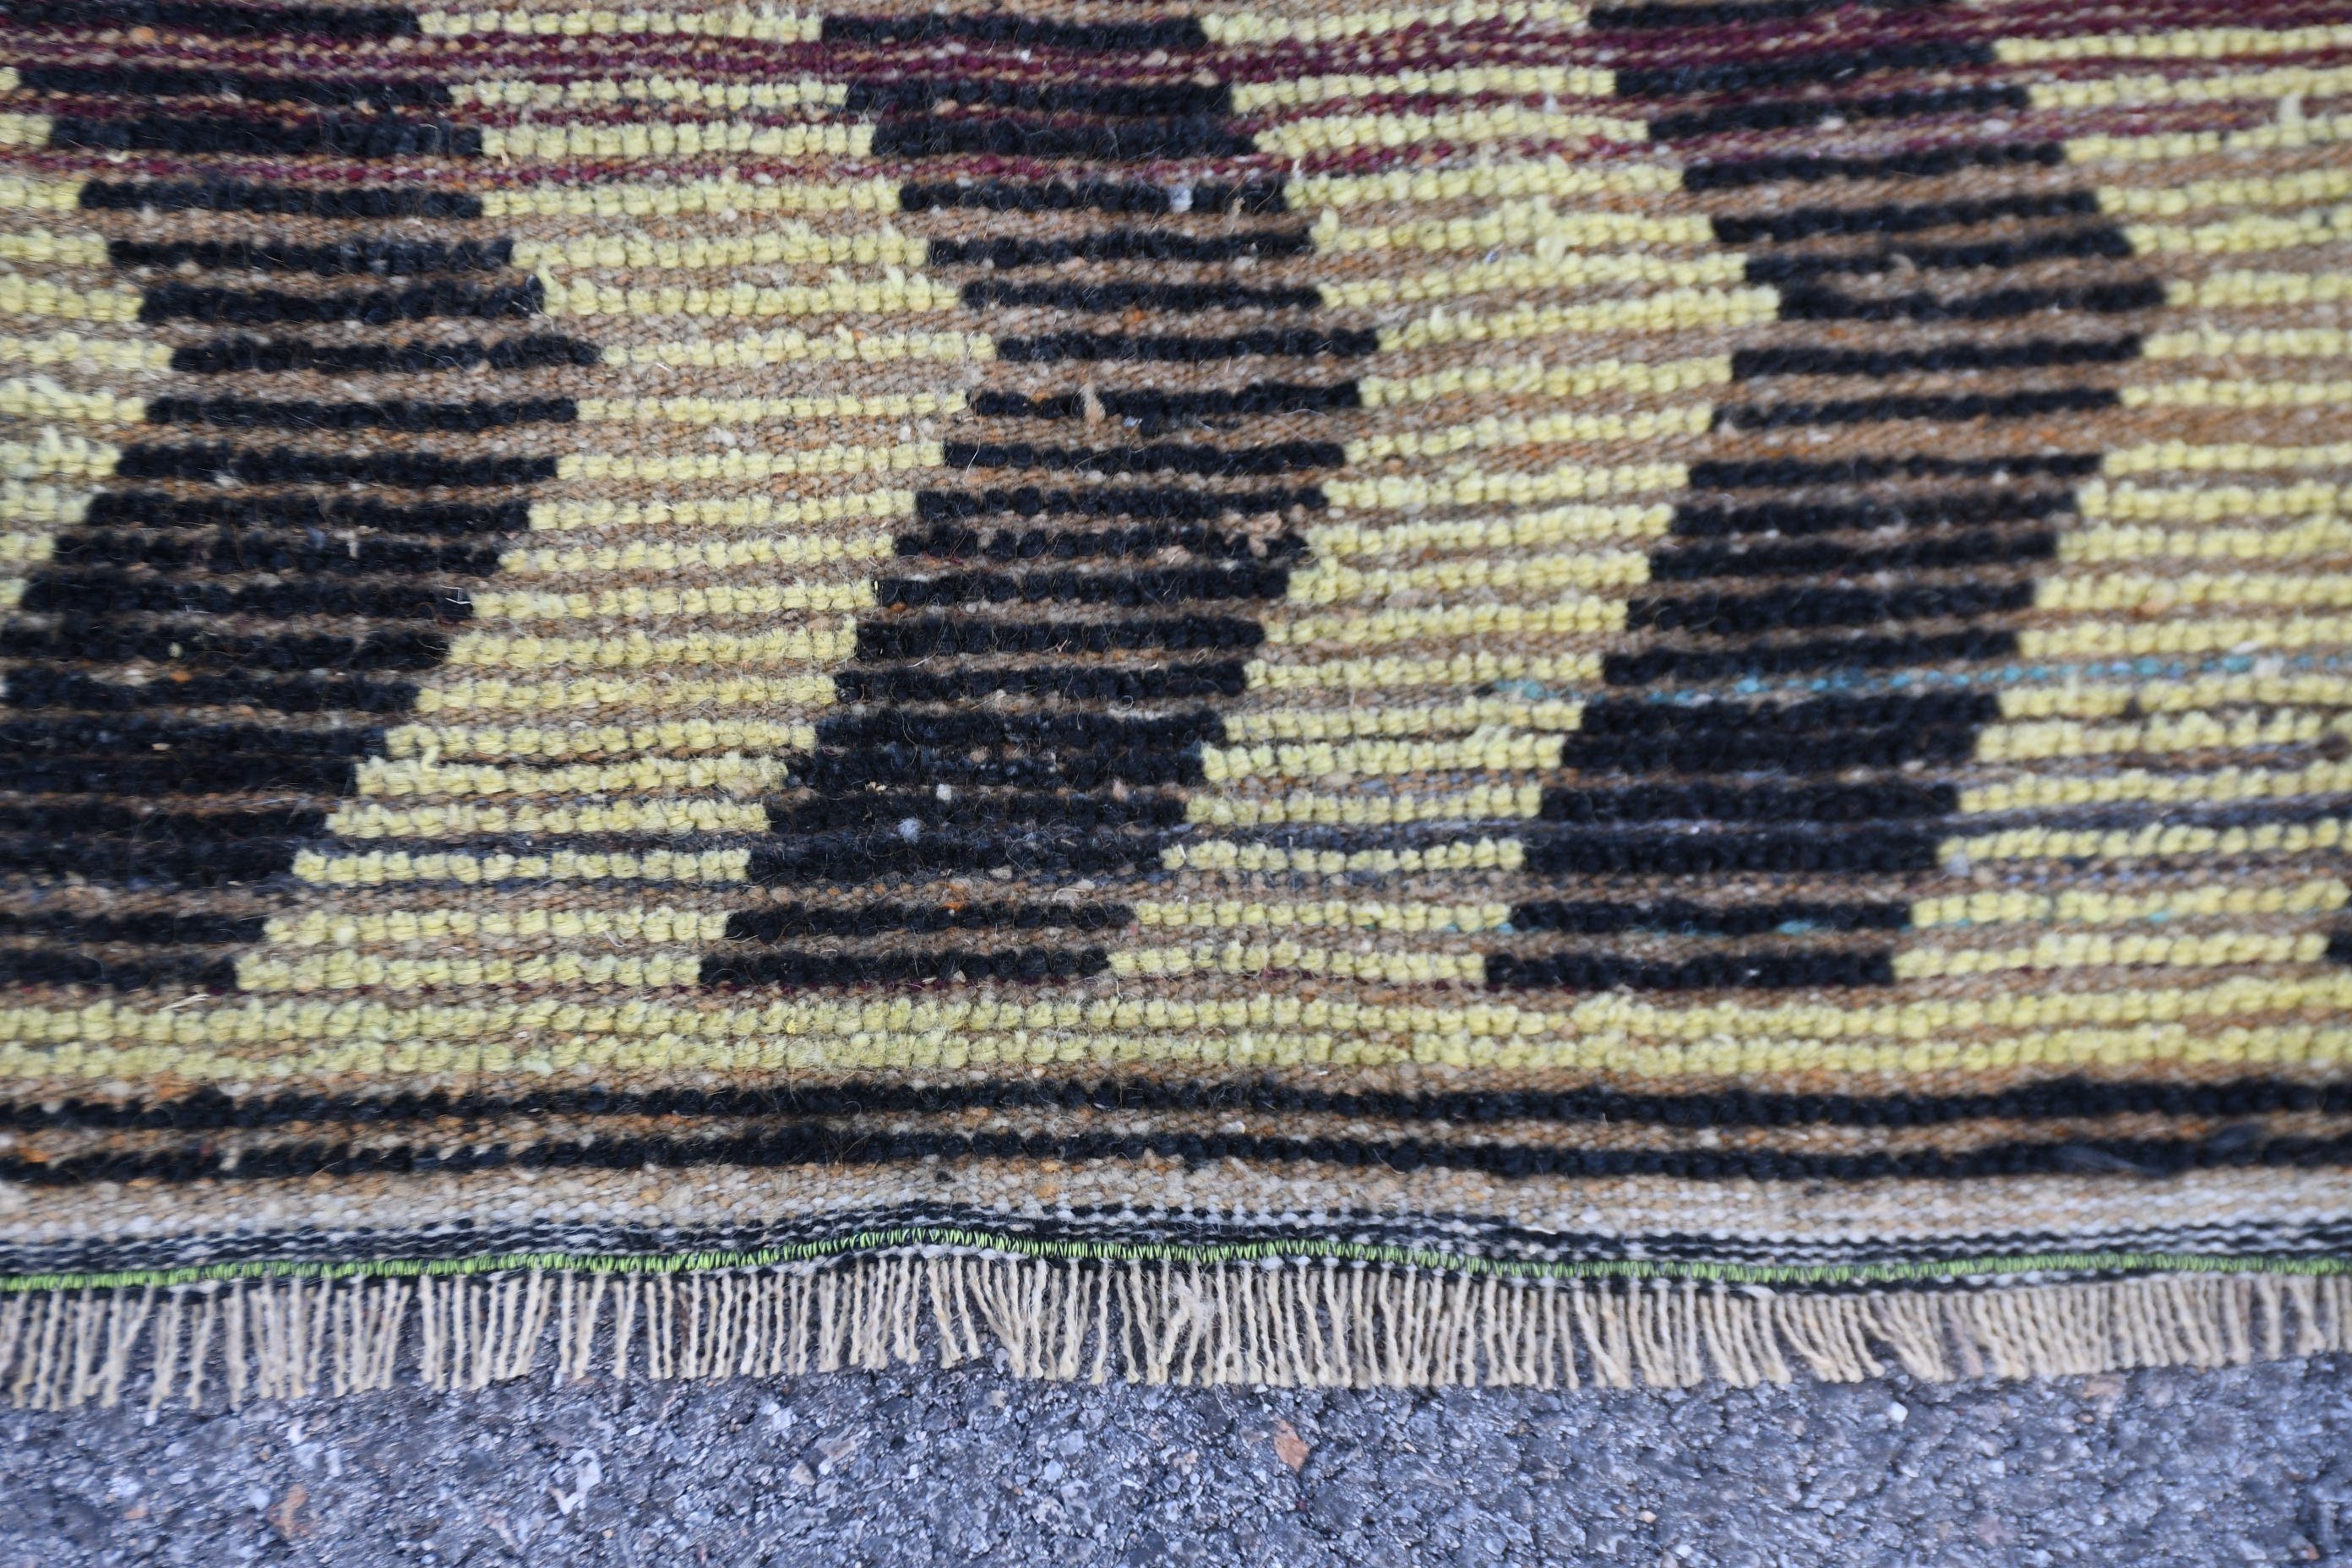 Yellow Home Decor Rug, 3.6x6.2 ft Accent Rugs, Kitchen Rug, Boho Rug, Cool Rug, Entry Rugs, Turkish Rugs, Vintage Rug, Kilim